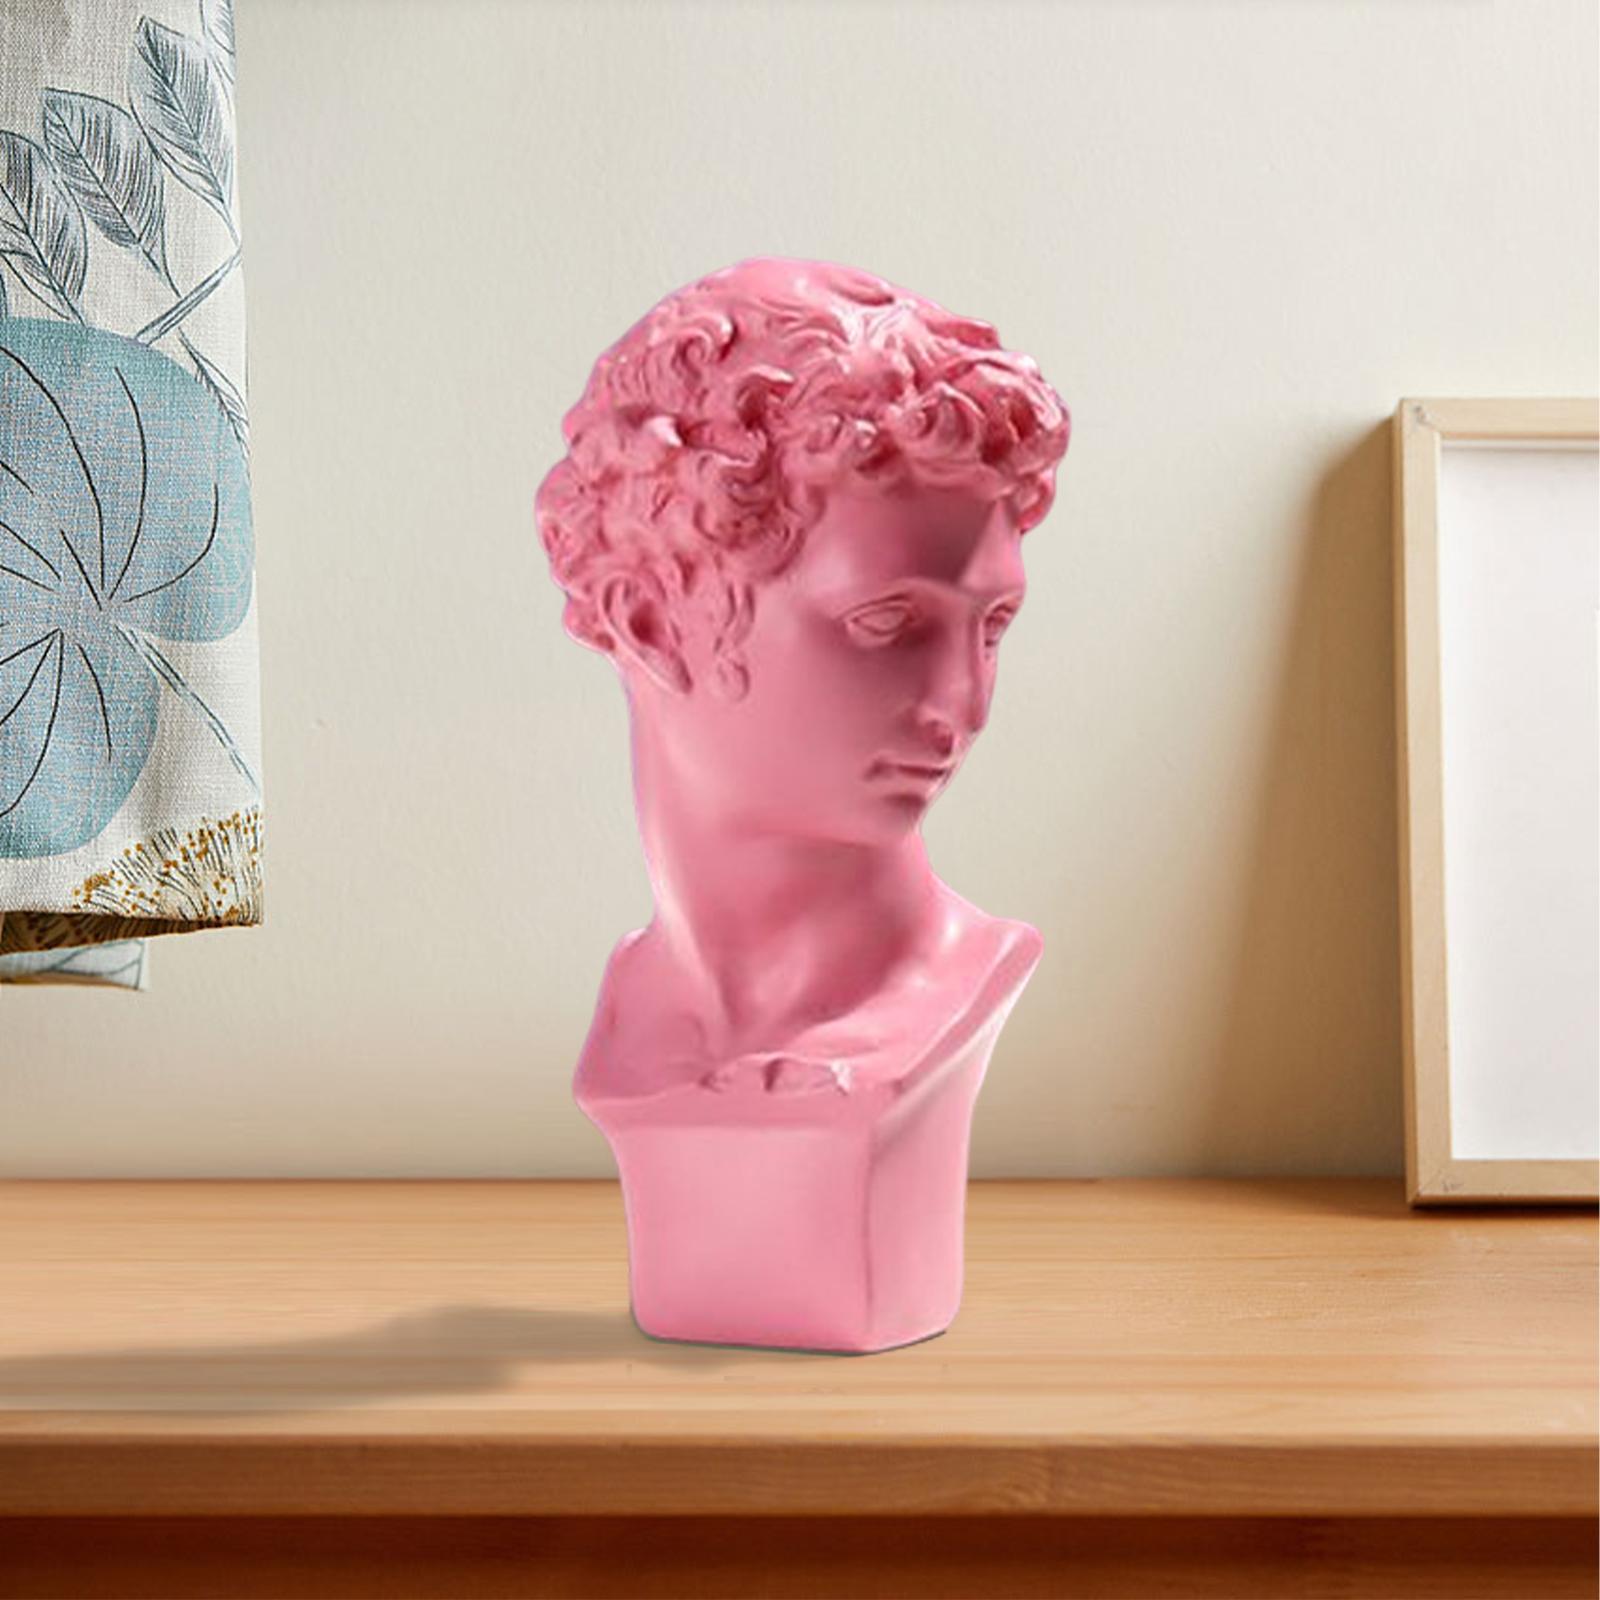 Famous David Statue Greek David Bust Sculpture for Home Decor Rose Red